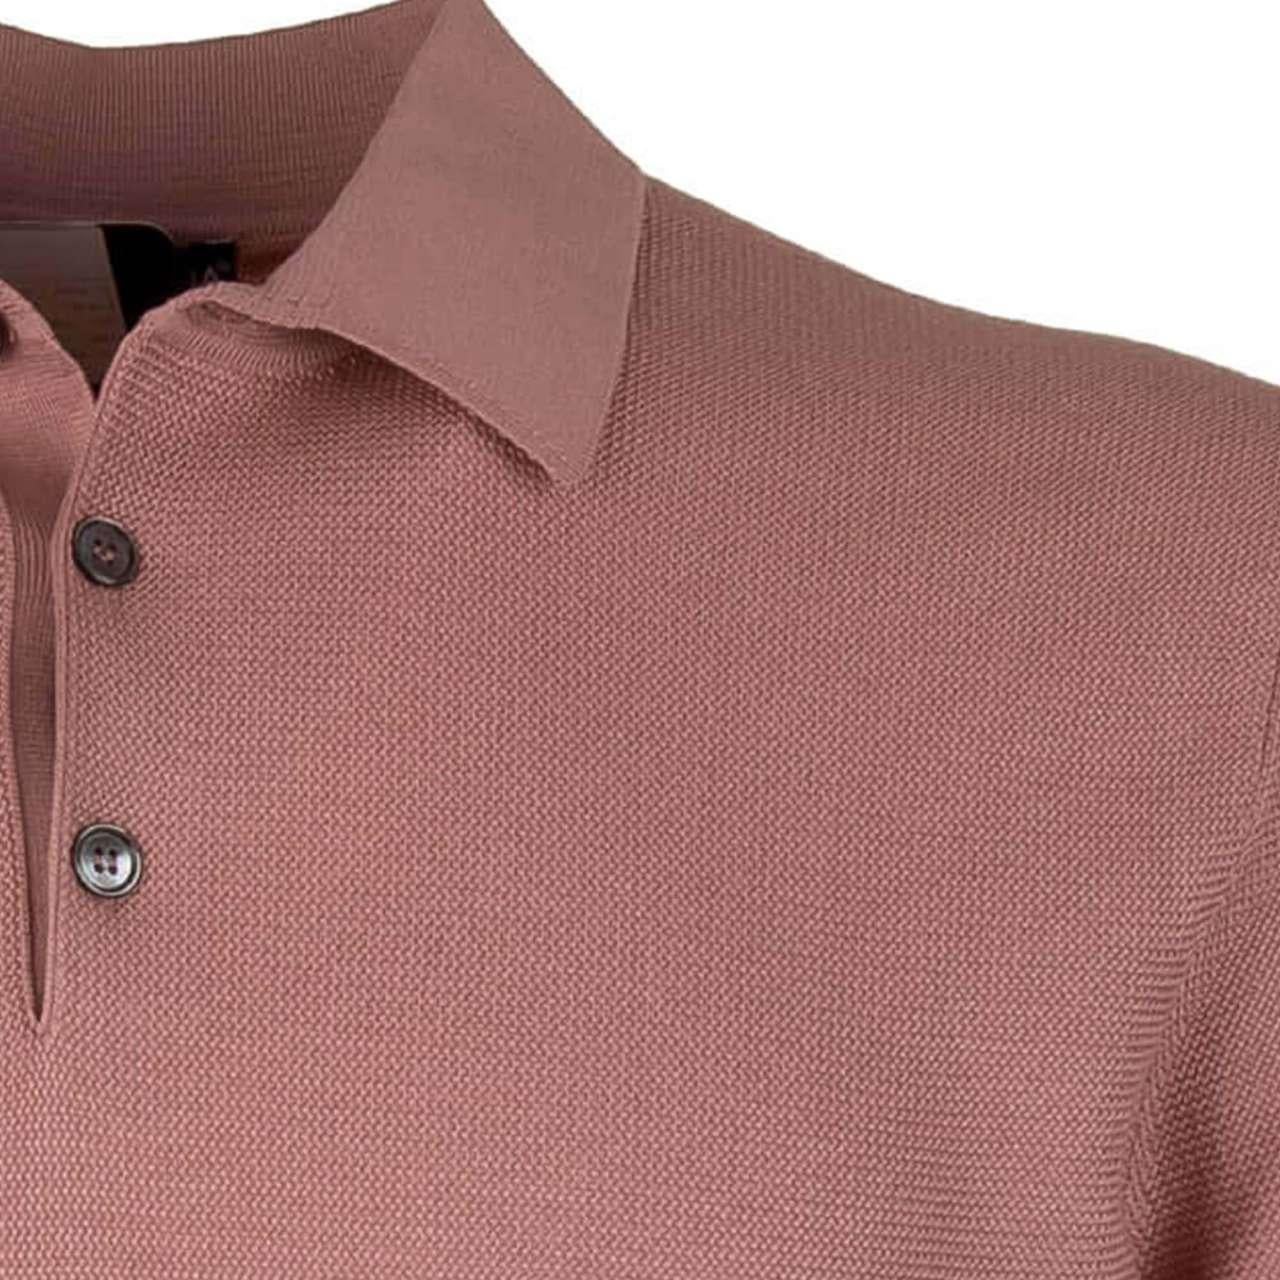 Dolce & Gabbana - Silk Polo Shirt T-Shirt Pink with Pearl Buttons 56 In Excellent Condition For Sale In Erkrath, DE